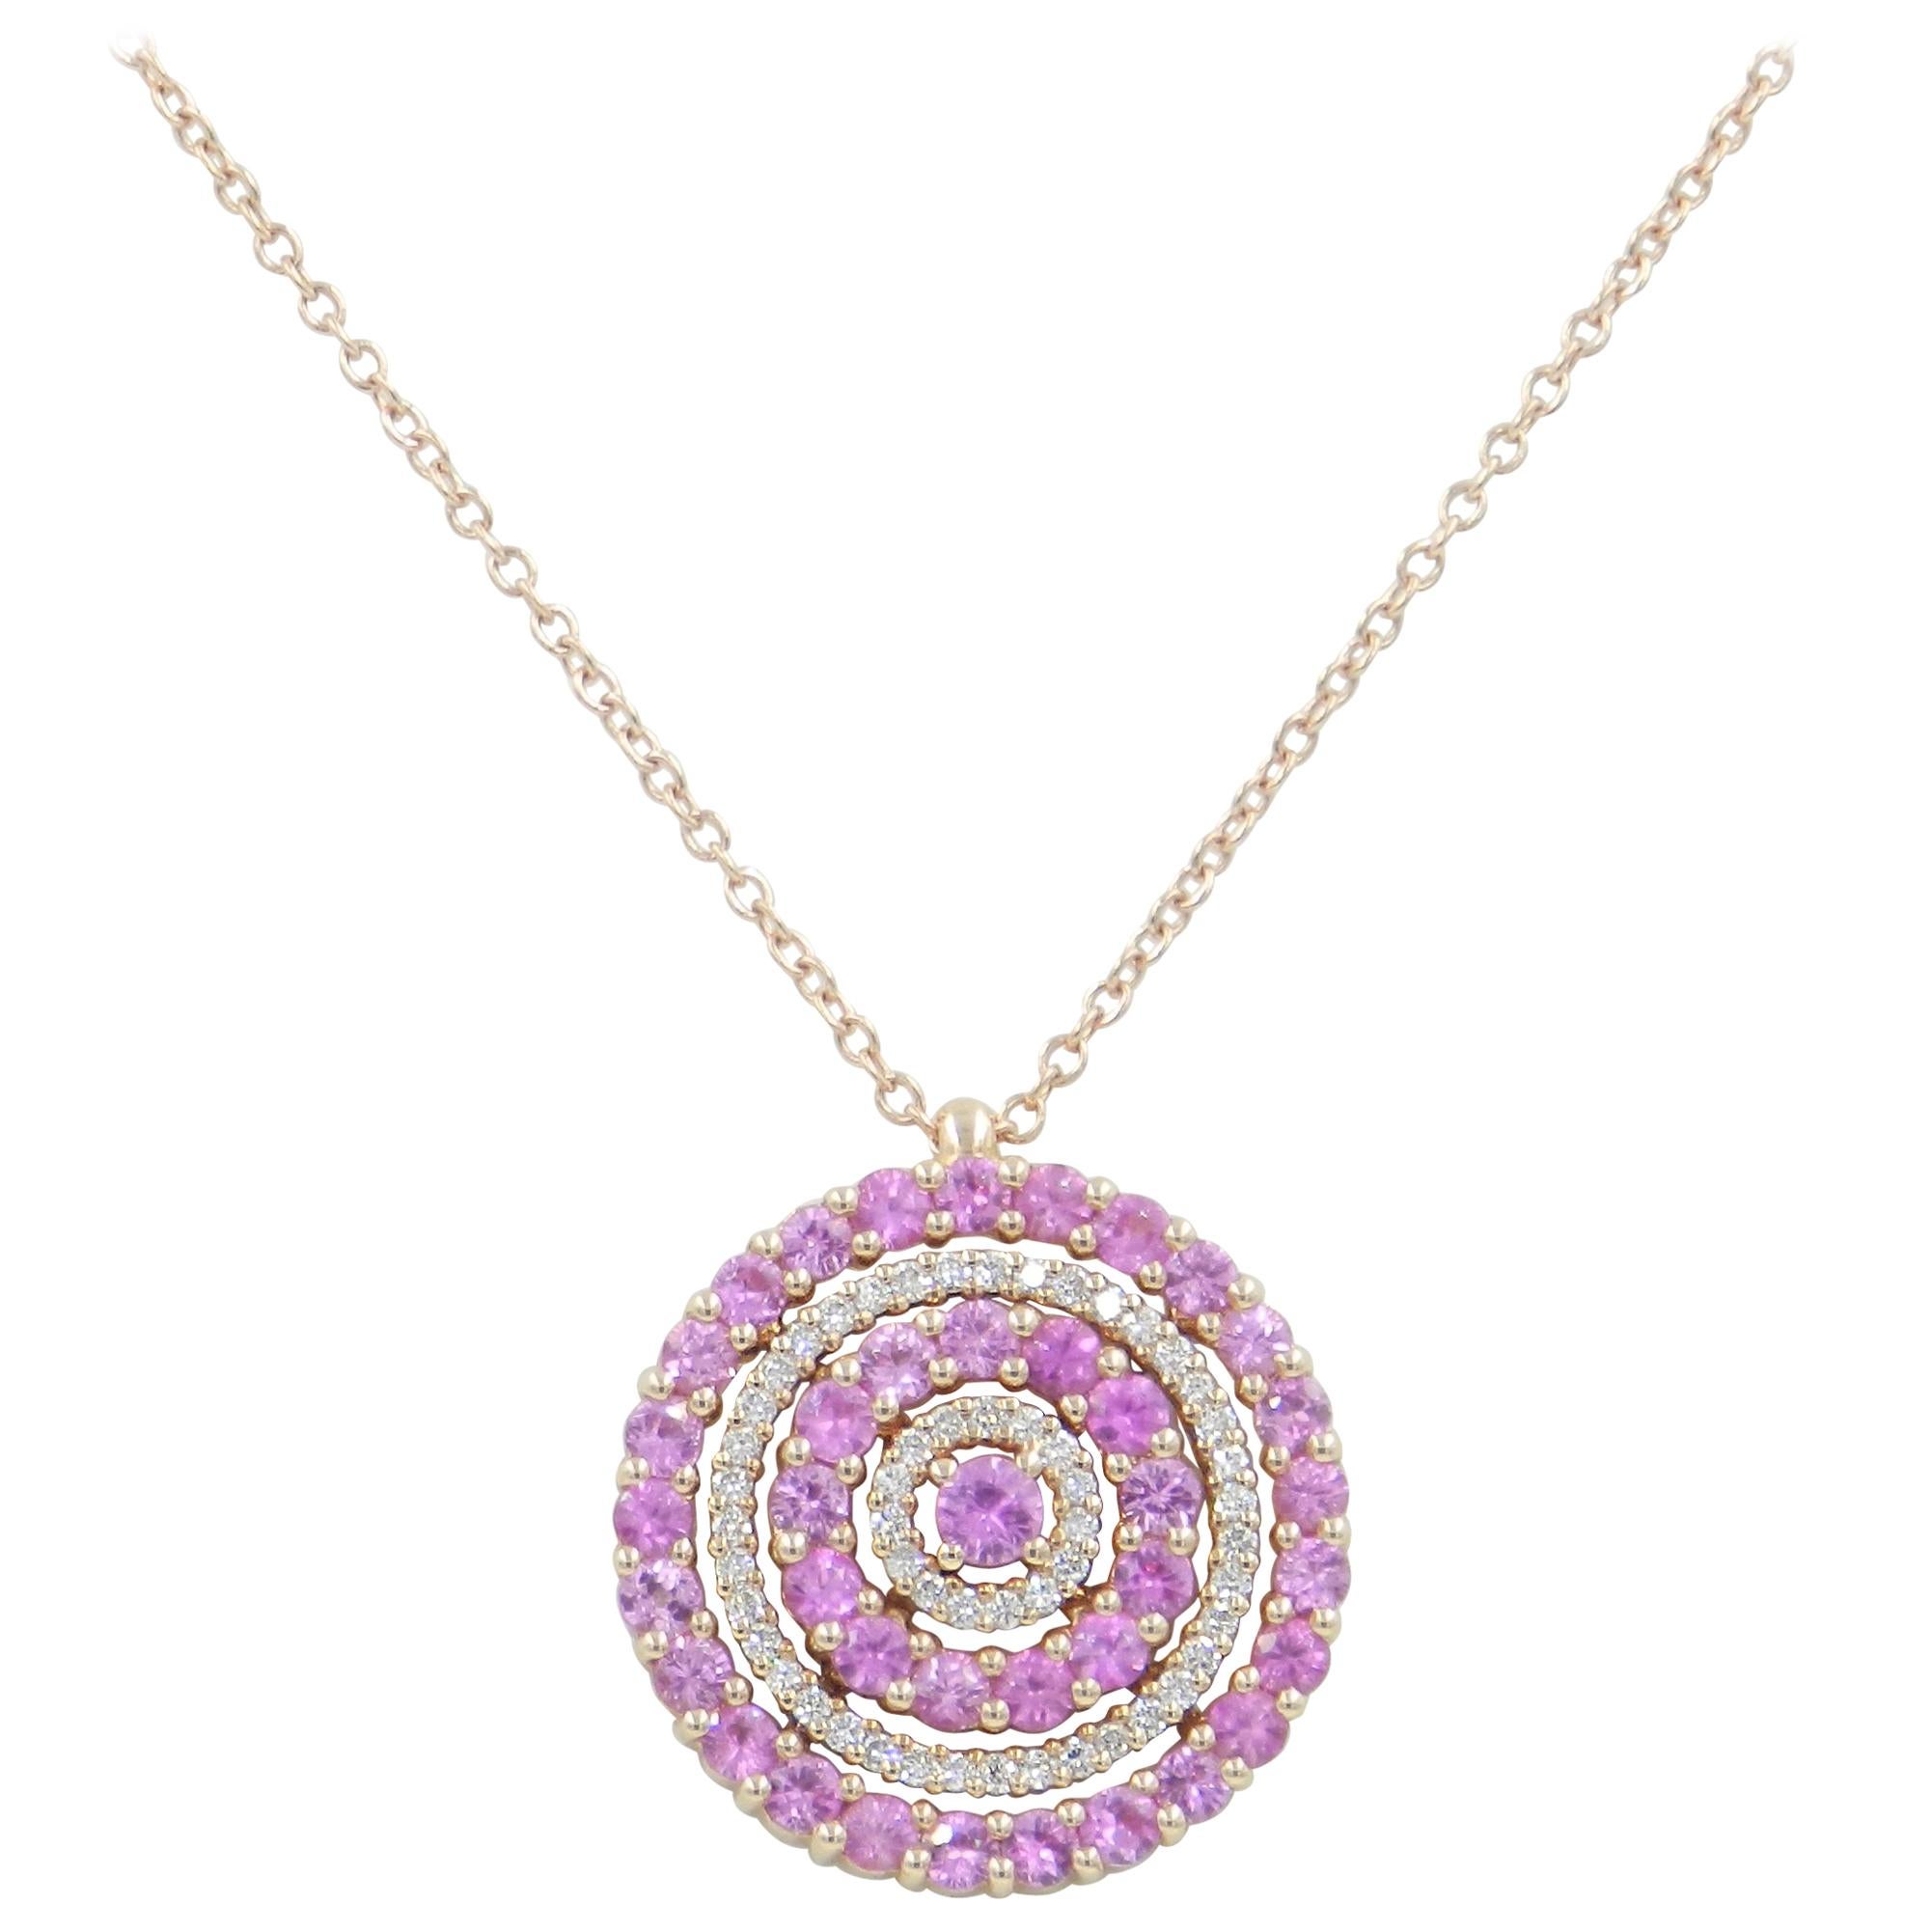 18 Karat Gold White Diamonds and Pink Sapphires Garavelli Pendant with Chain For Sale